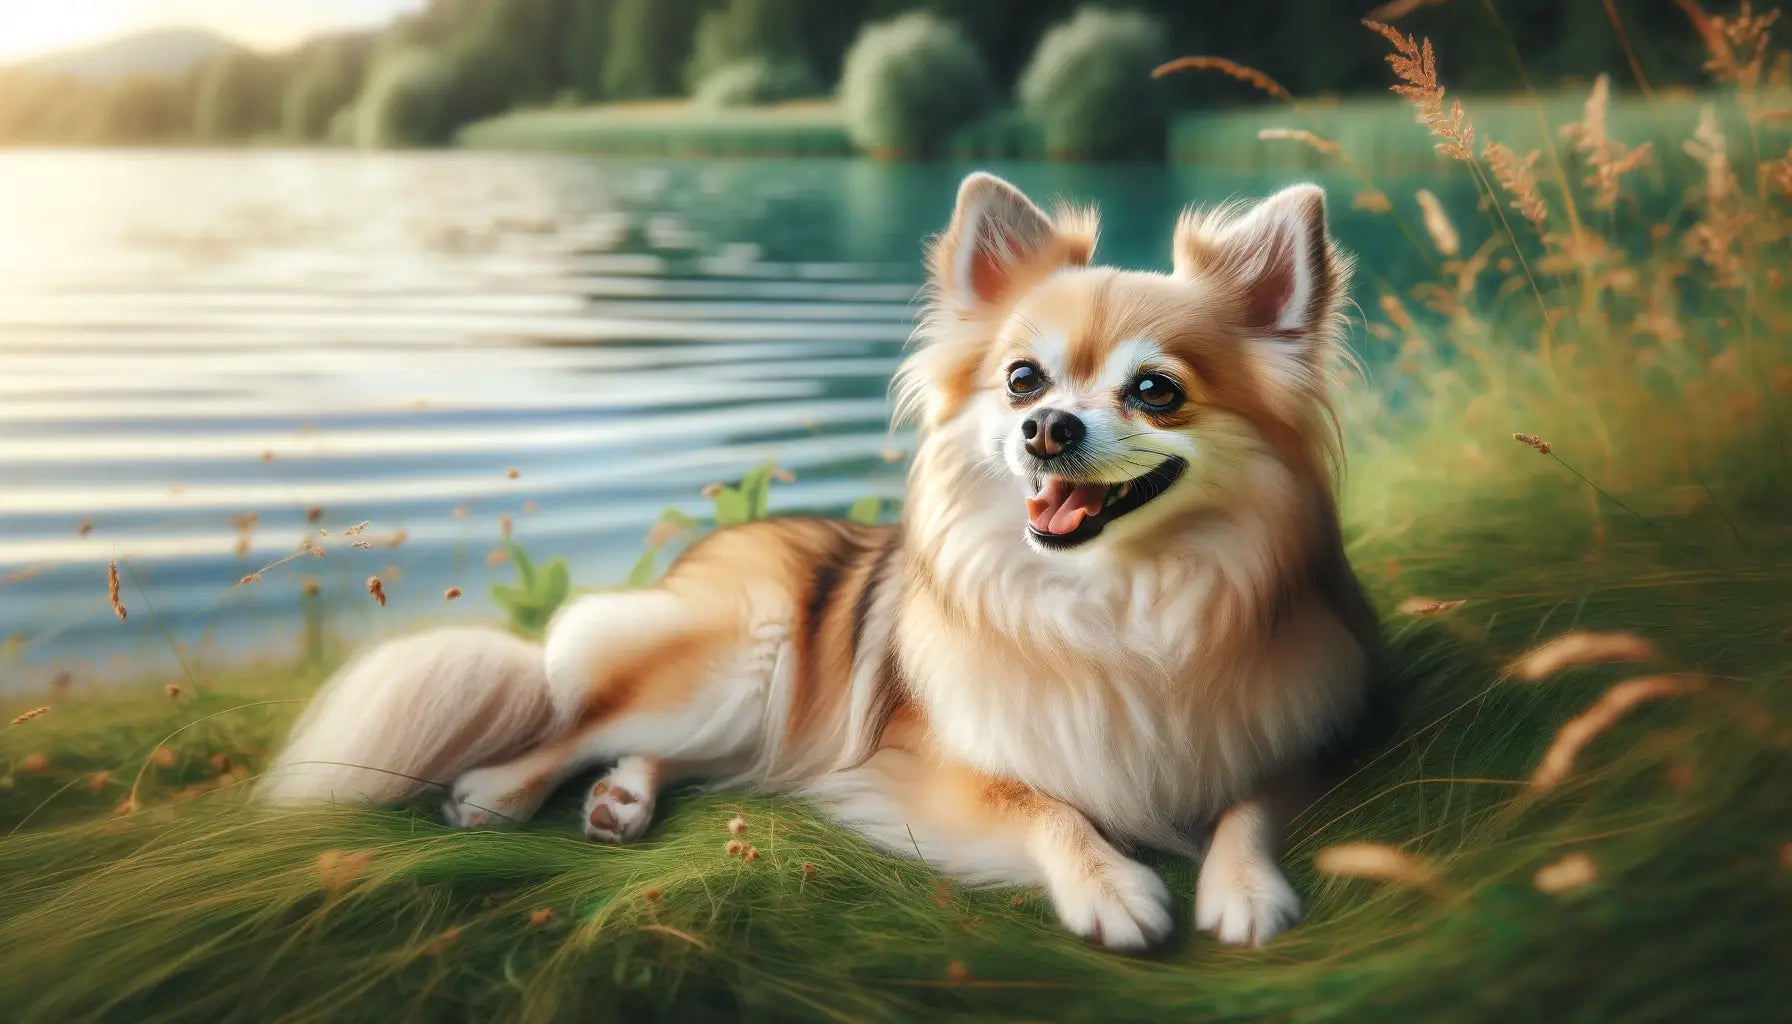 A Chihuahua Husky Mix lounging on the grass near water, embodying traits from both breeds with fluffy fur and a happy expression.